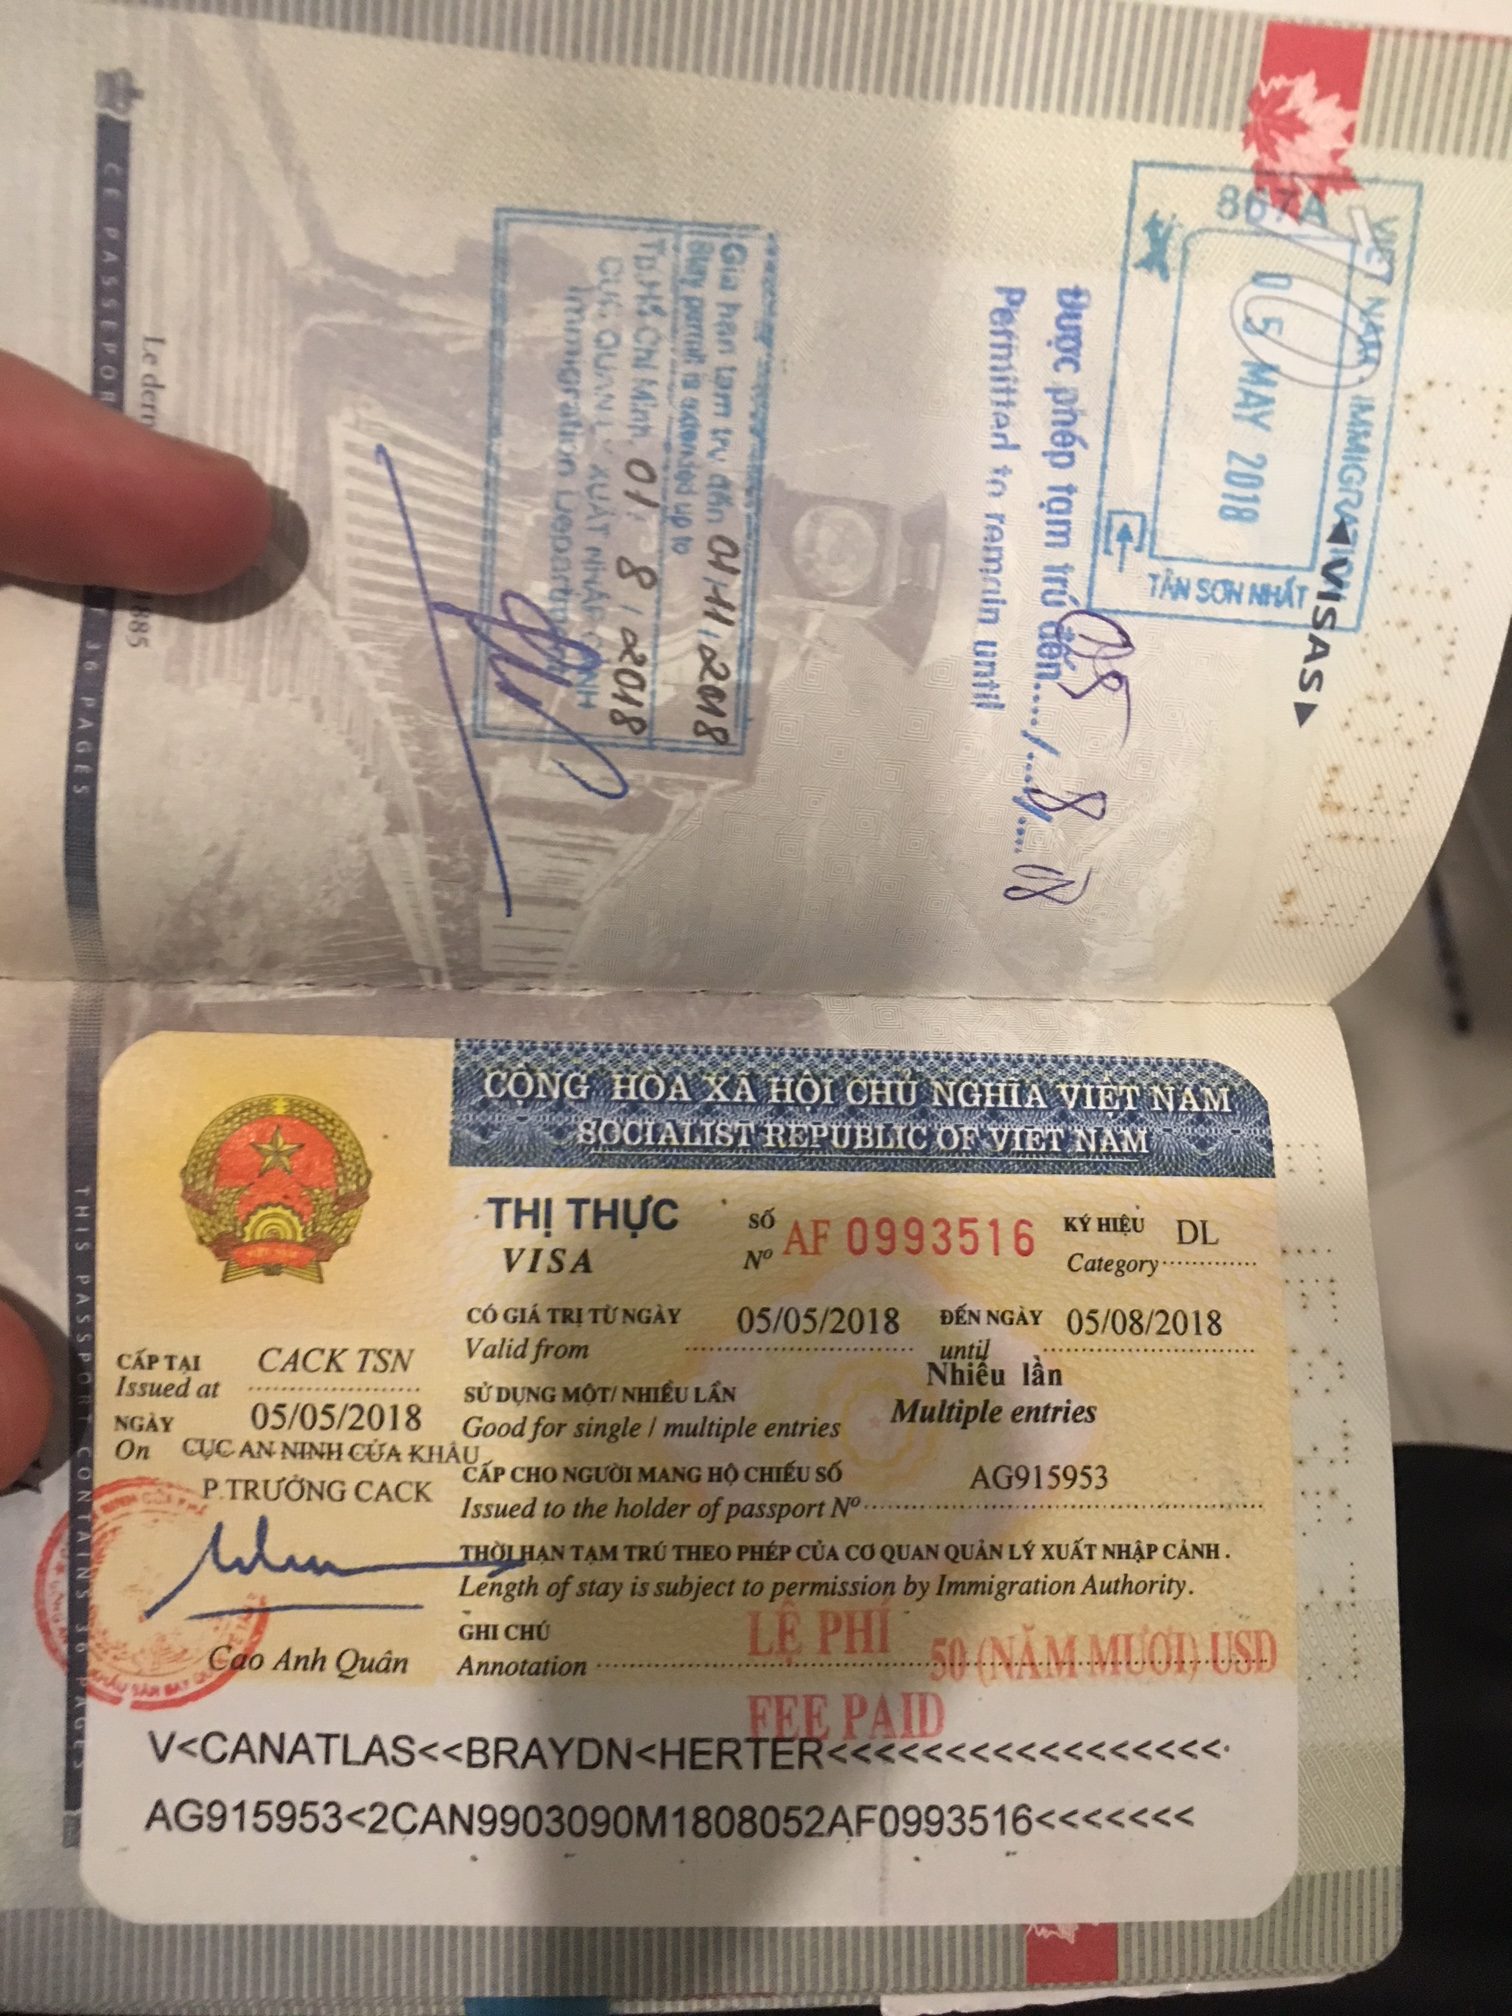 How Much Does It Cost For Three Month Multiple Entry Visa To Vietnam?